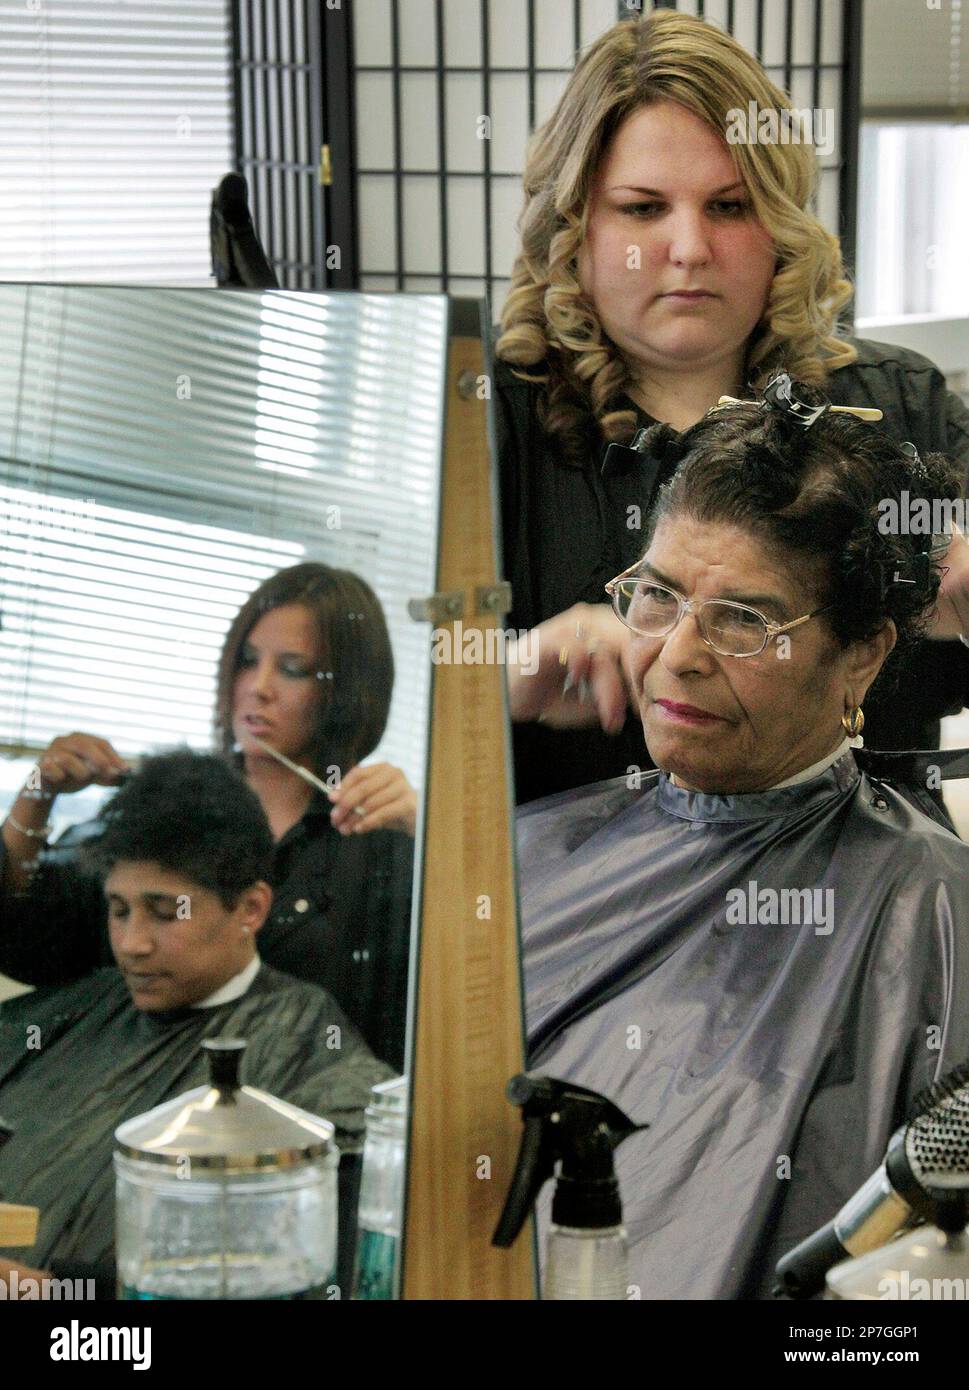 https://c8.alamy.com/comp/2P7GGP1/ashley-sloane-right-rear-gives-maria-centeio-right-front-a-haircut-as-fellow-lebaron-hairdressing-academy-student-kayla-gallugi-left-rear-is-seen-reflected-in-the-mirror-cutting-hair-for-sonjia-langford-left-front-wednesday-may-19-2010-in-new-bedford-mass-hair-from-the-academy-will-be-donated-to-an-organization-that-can-use-it-to-create-absorbent-mats-for-the-clean-up-of-oil-spills-like-the-current-spill-in-the-gulf-of-mexico-ap-photothe-standard-times-peter-pereira-2P7GGP1.jpg